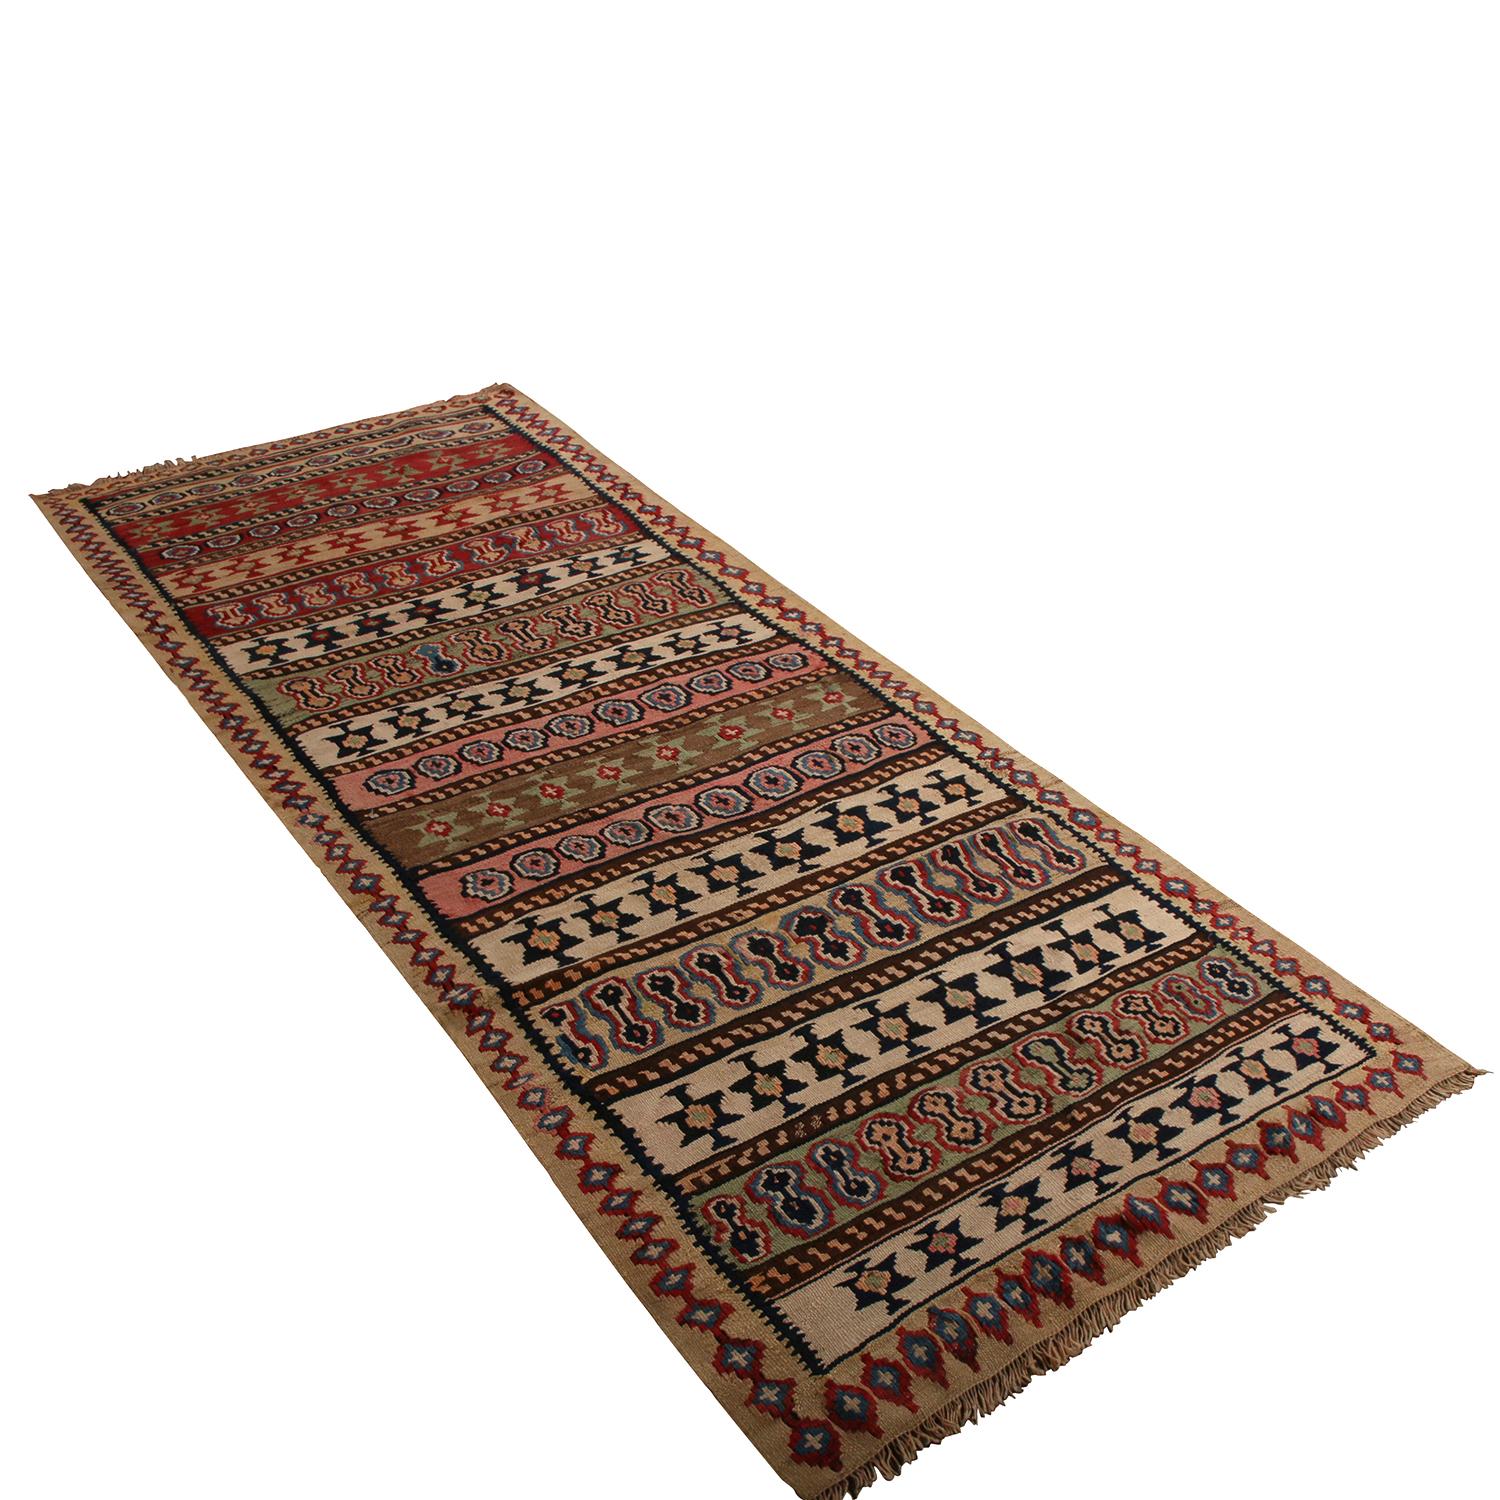 Handwoven in wool originating between 1950-1960, this vintage midcentury Persian Kilim hails from the Bidjar (Bijar) region, known for exceptionally durable and sought-after pieces among tribal rarities. The emphasis of highlights and accenting